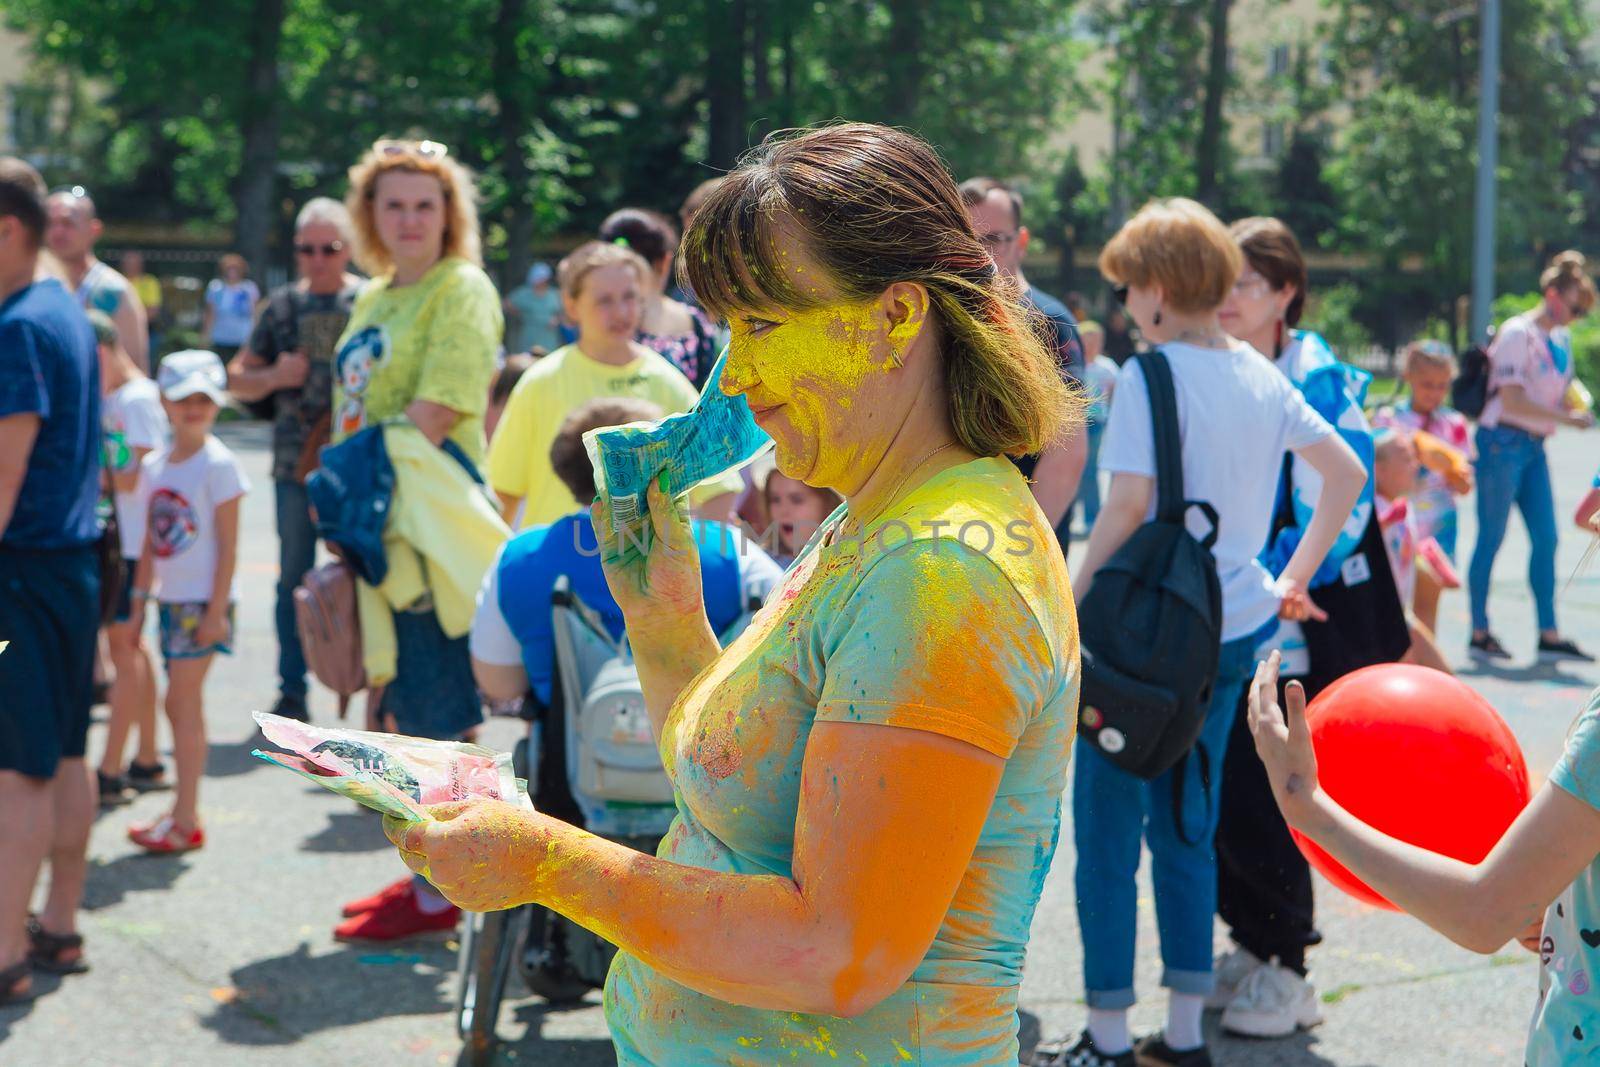 Novokuznetsk, Kemerovo region, Russia - June 12, 2022 :: Woman with colorful face painted with holi powder having fun outdoors.